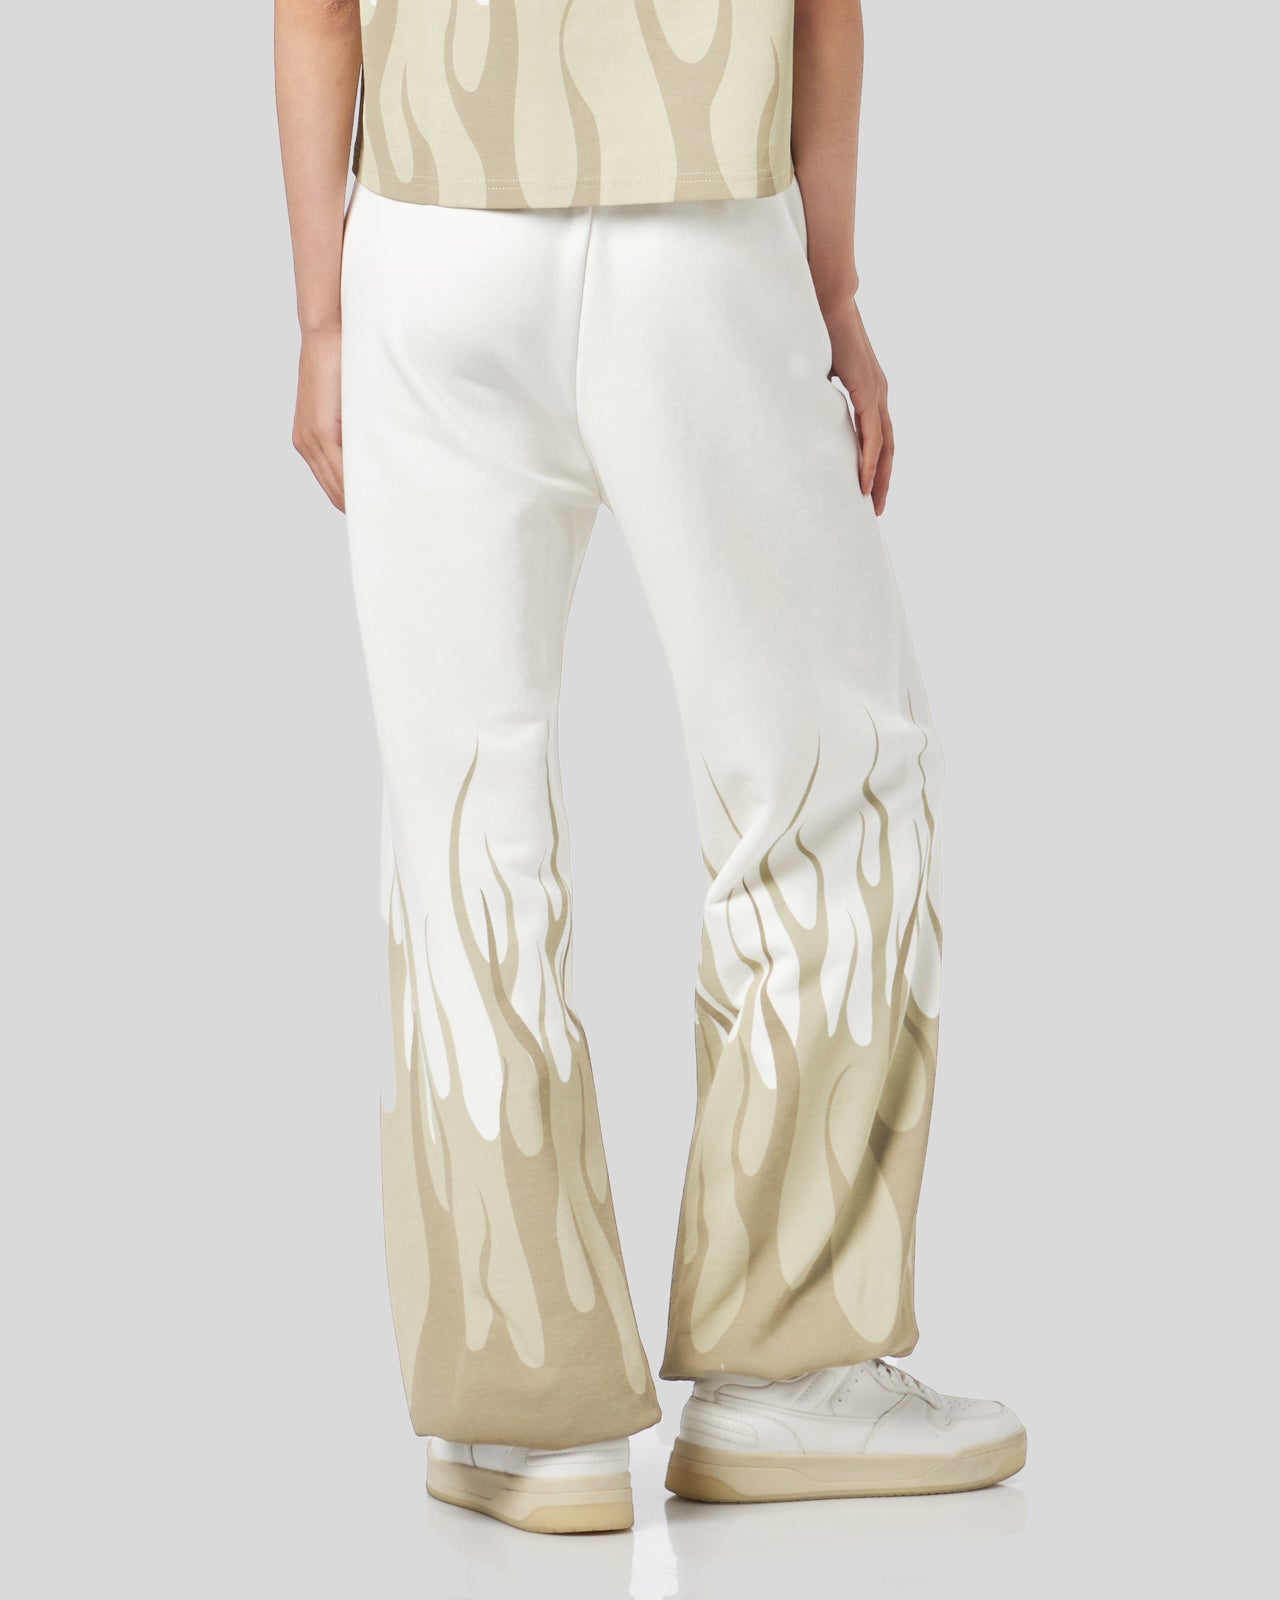 WHITE PANTS WITH DOUBLE SAND FLAMES PRINT